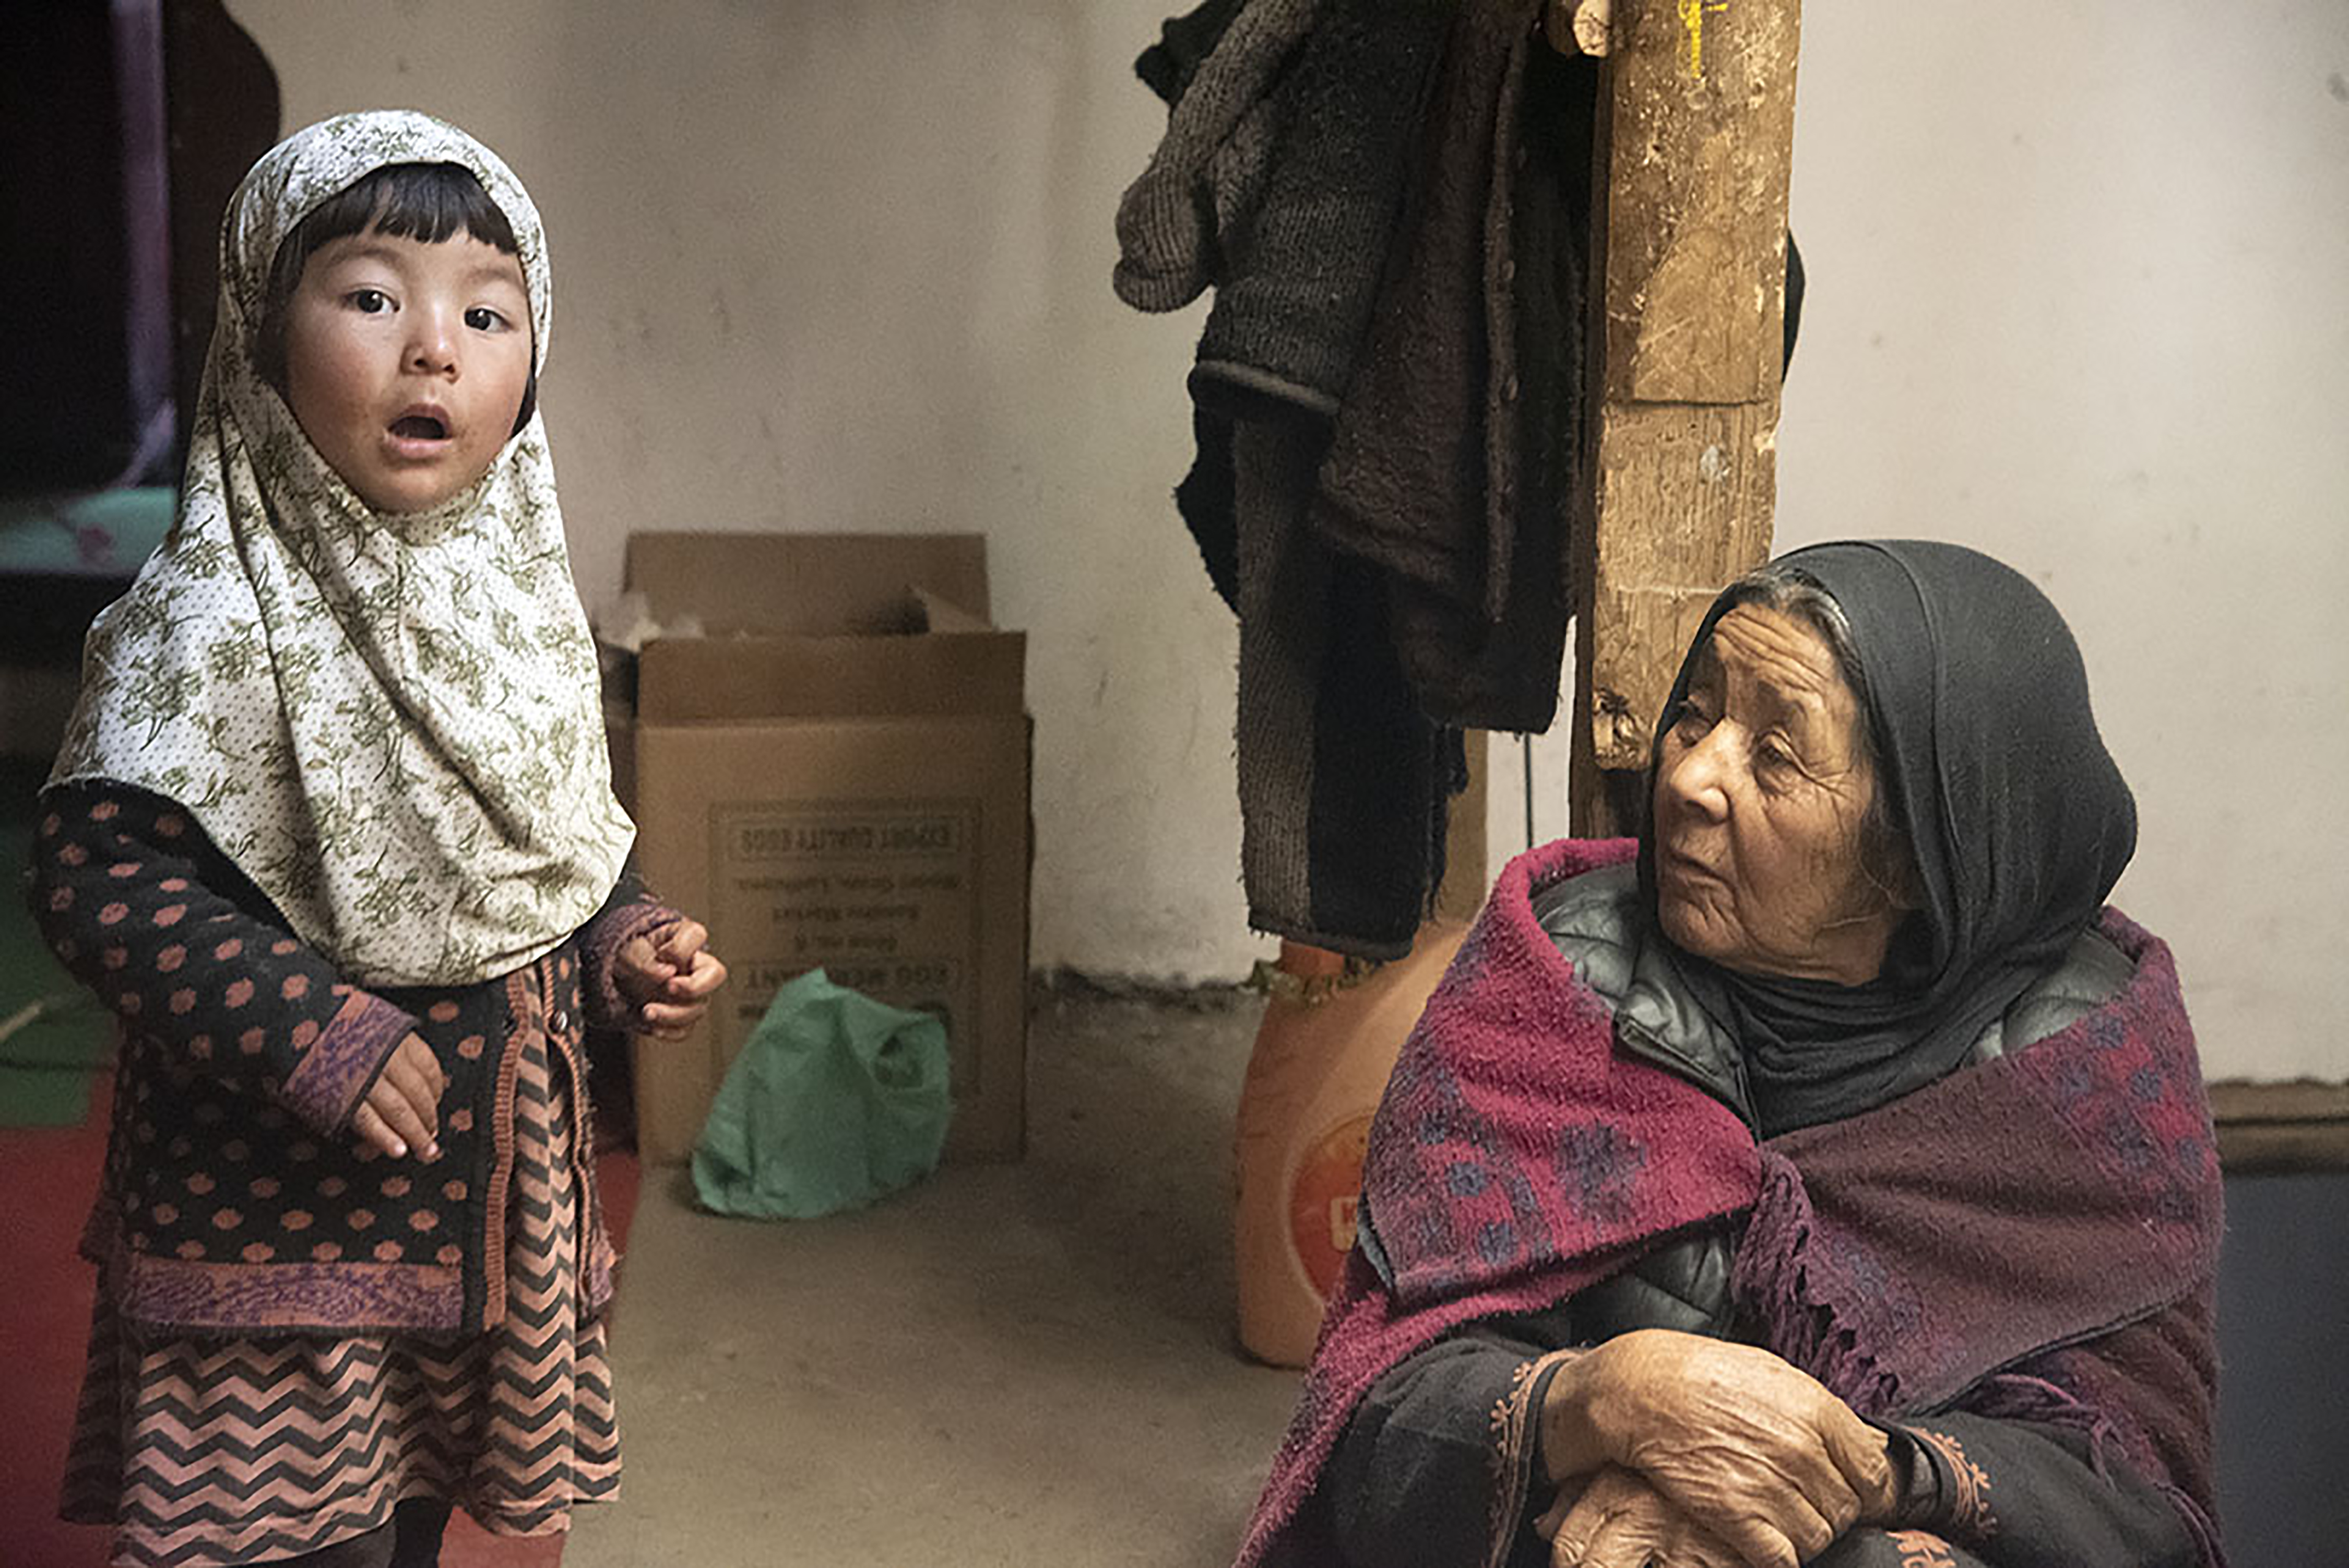 A little girl looks at the camera, while an old woman looks to her; both are wearing headscarves (image: Sugato Mukherjee)